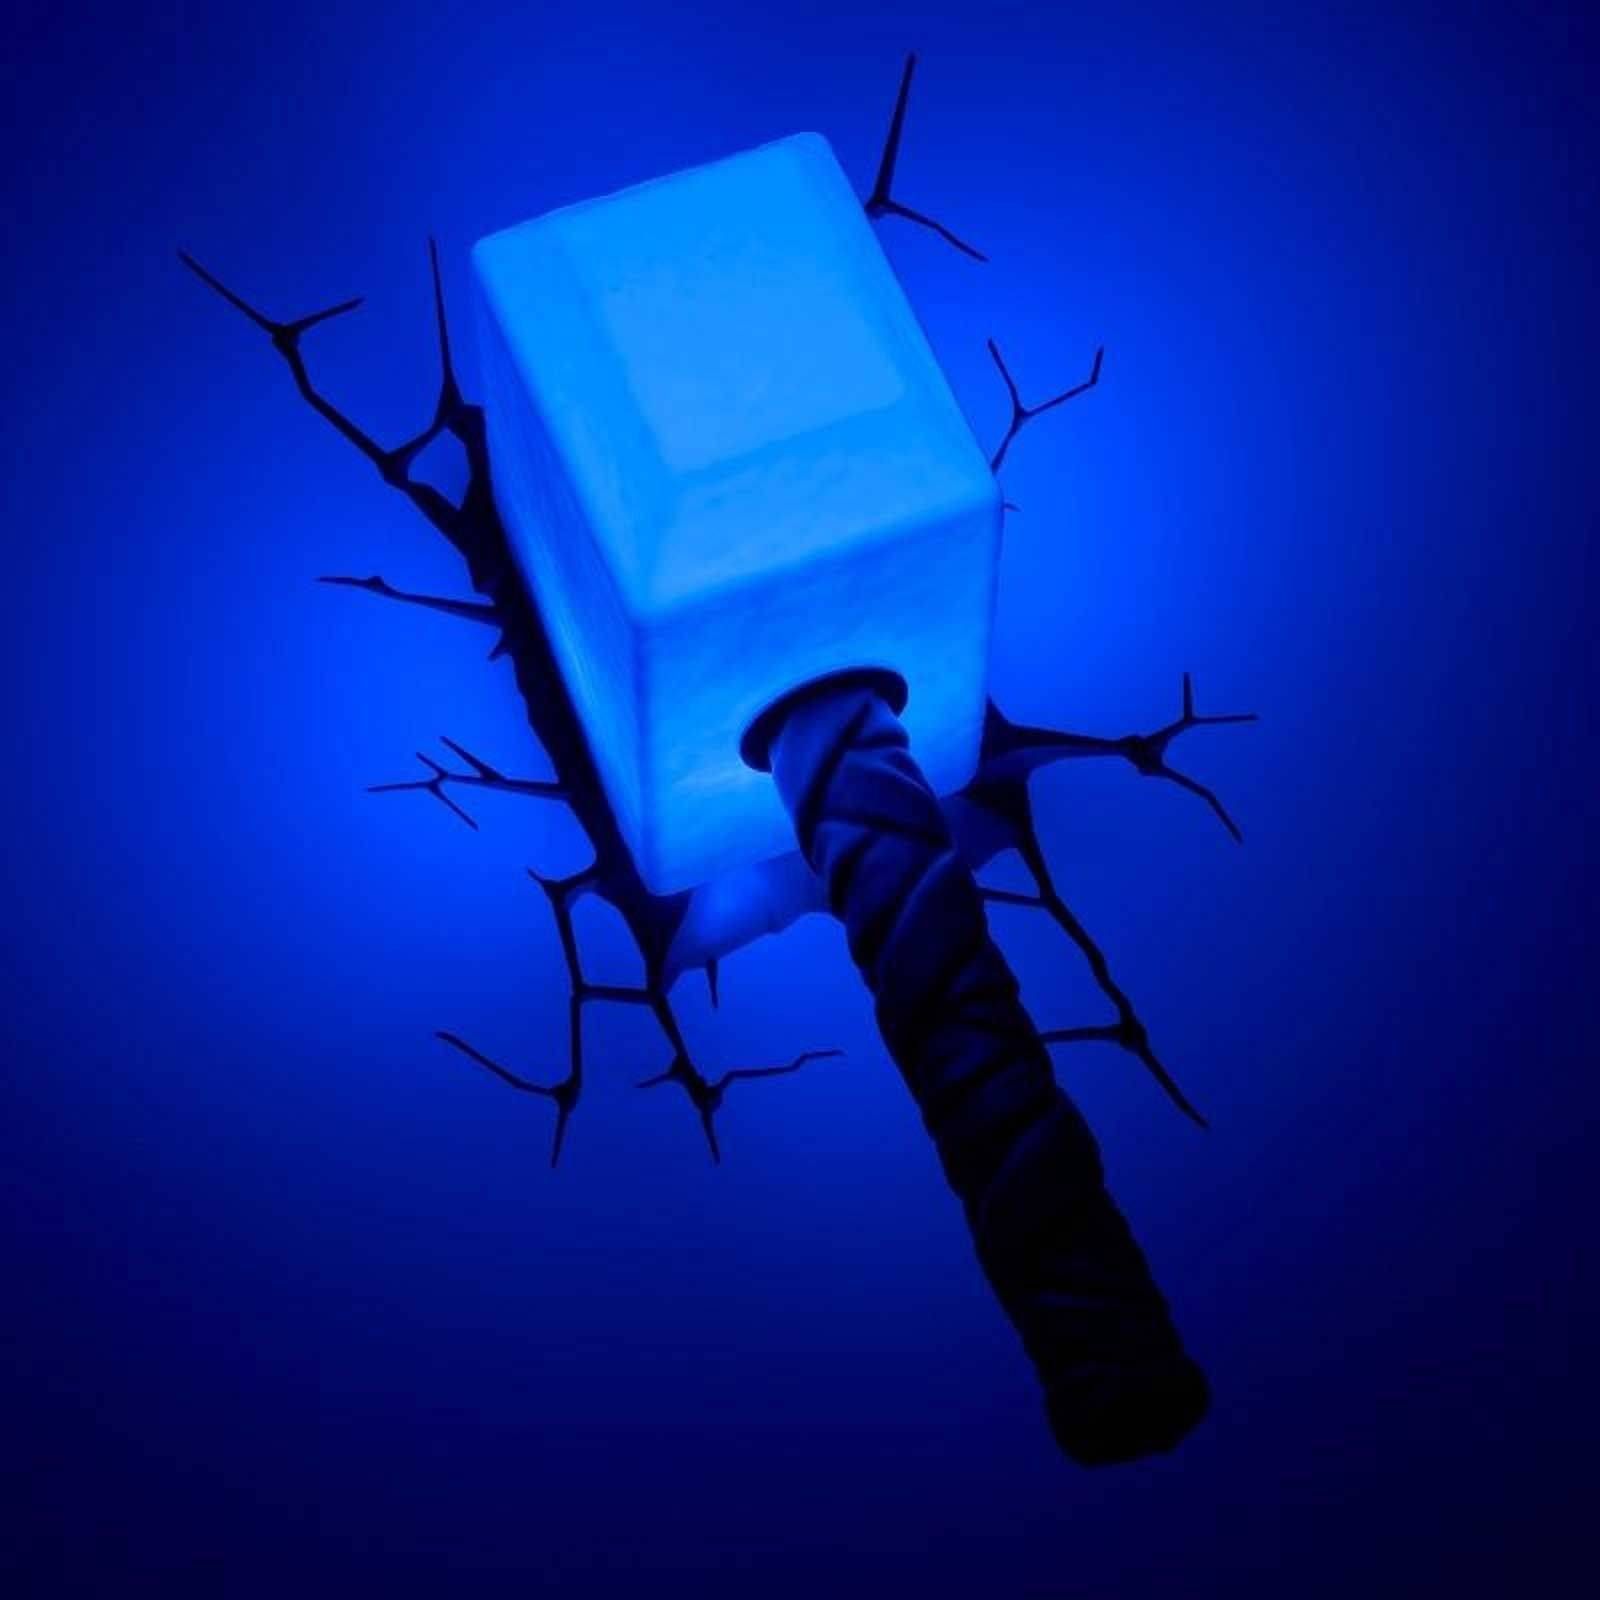 The Avengers 3d Wall Art Nightlight – Thor Hammer | This Stuff Online Intended For Most Recently Released Thor Hammer 3d Wall Art (View 2 of 20)